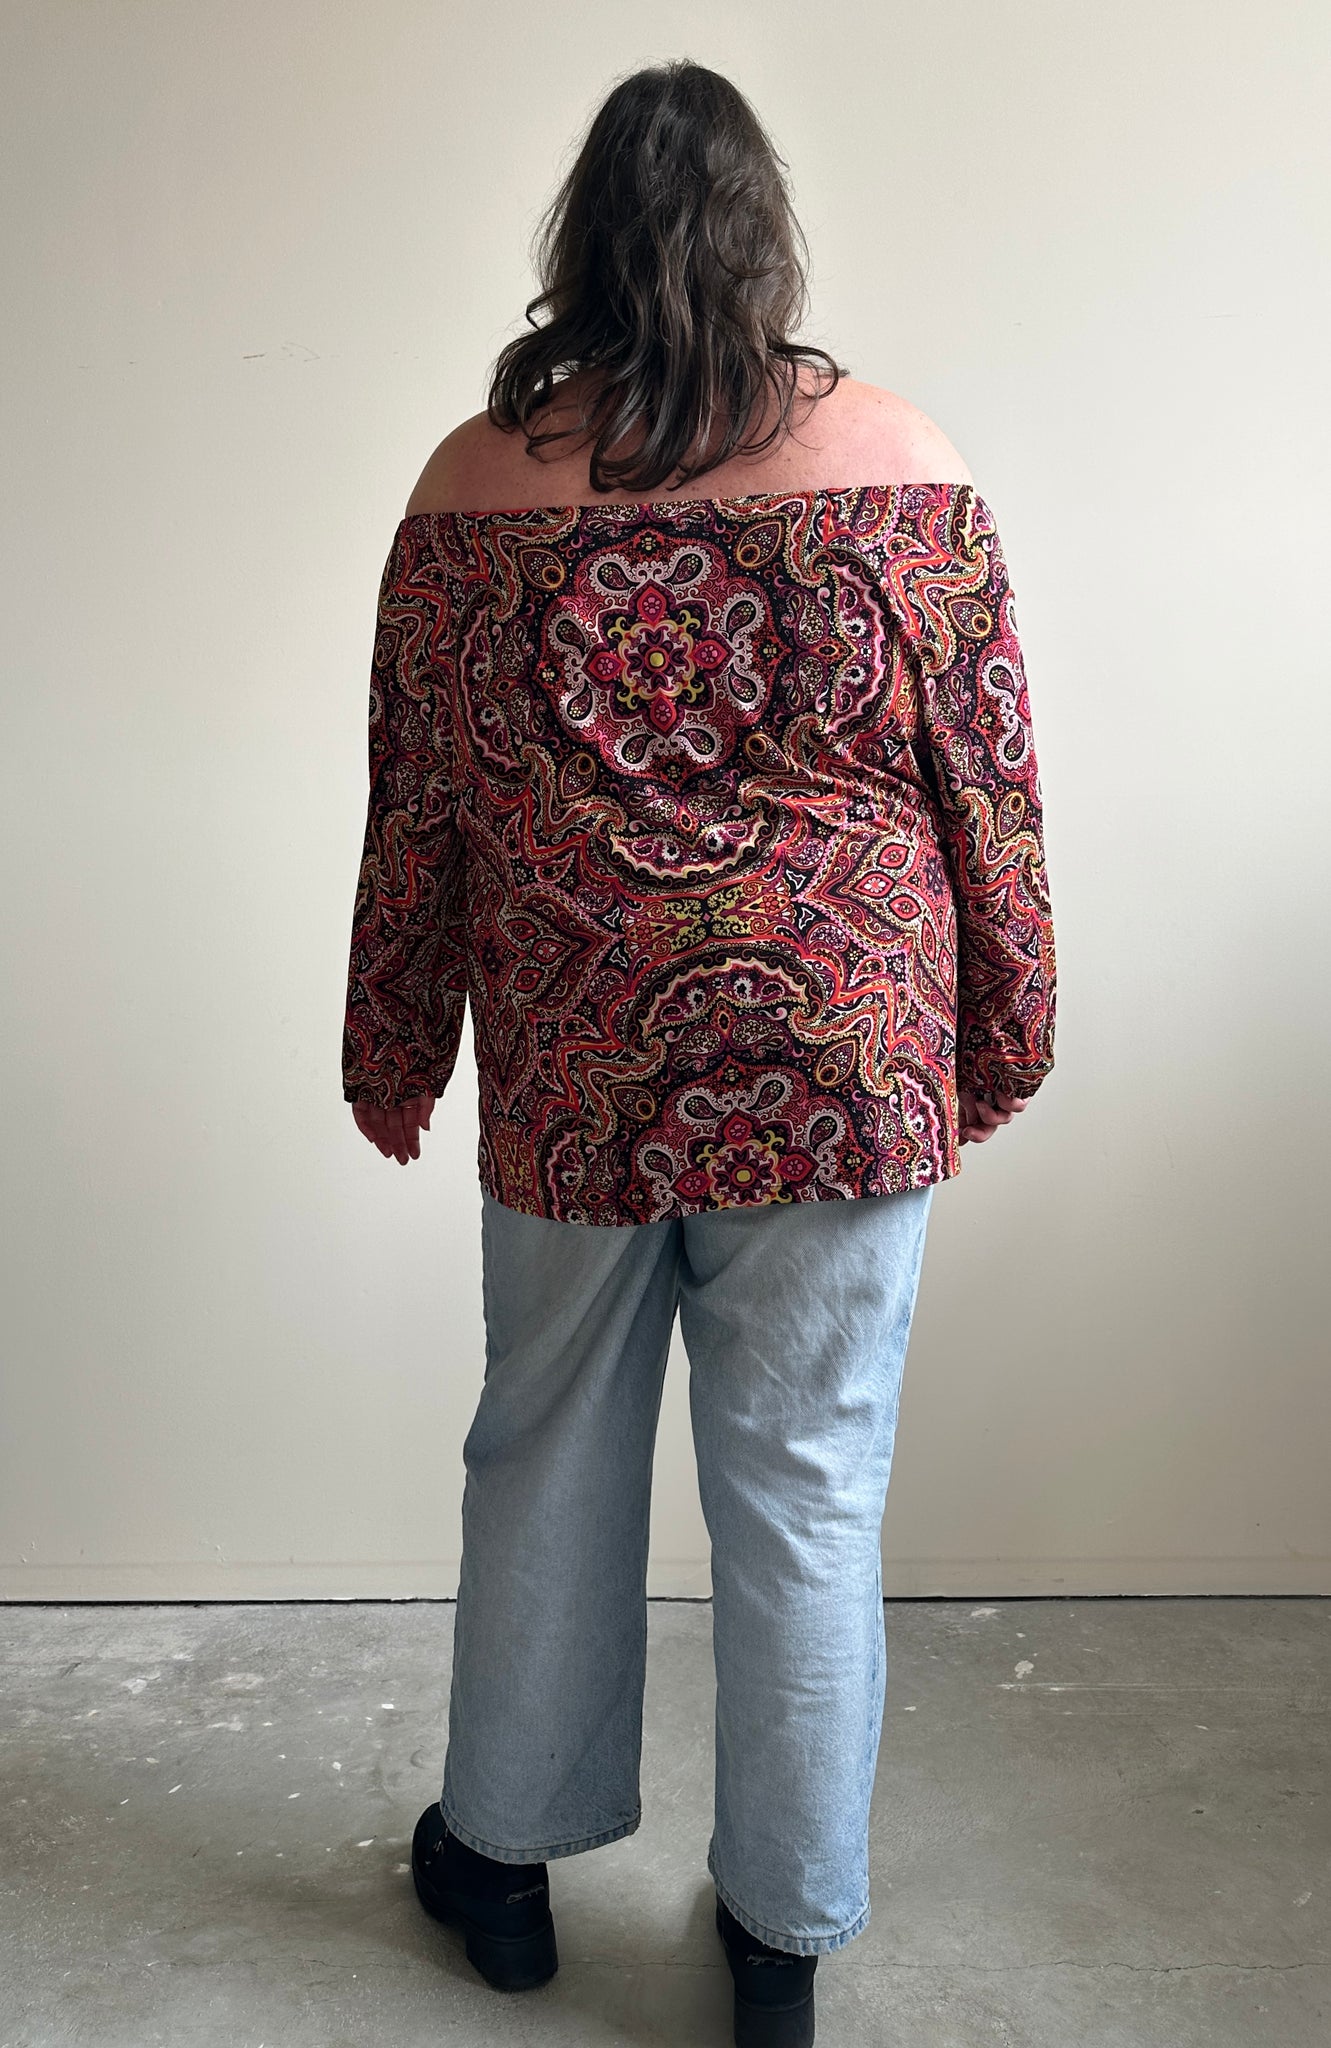 Multicolor Paisley Patterned Top with Chain Detail (4XL)